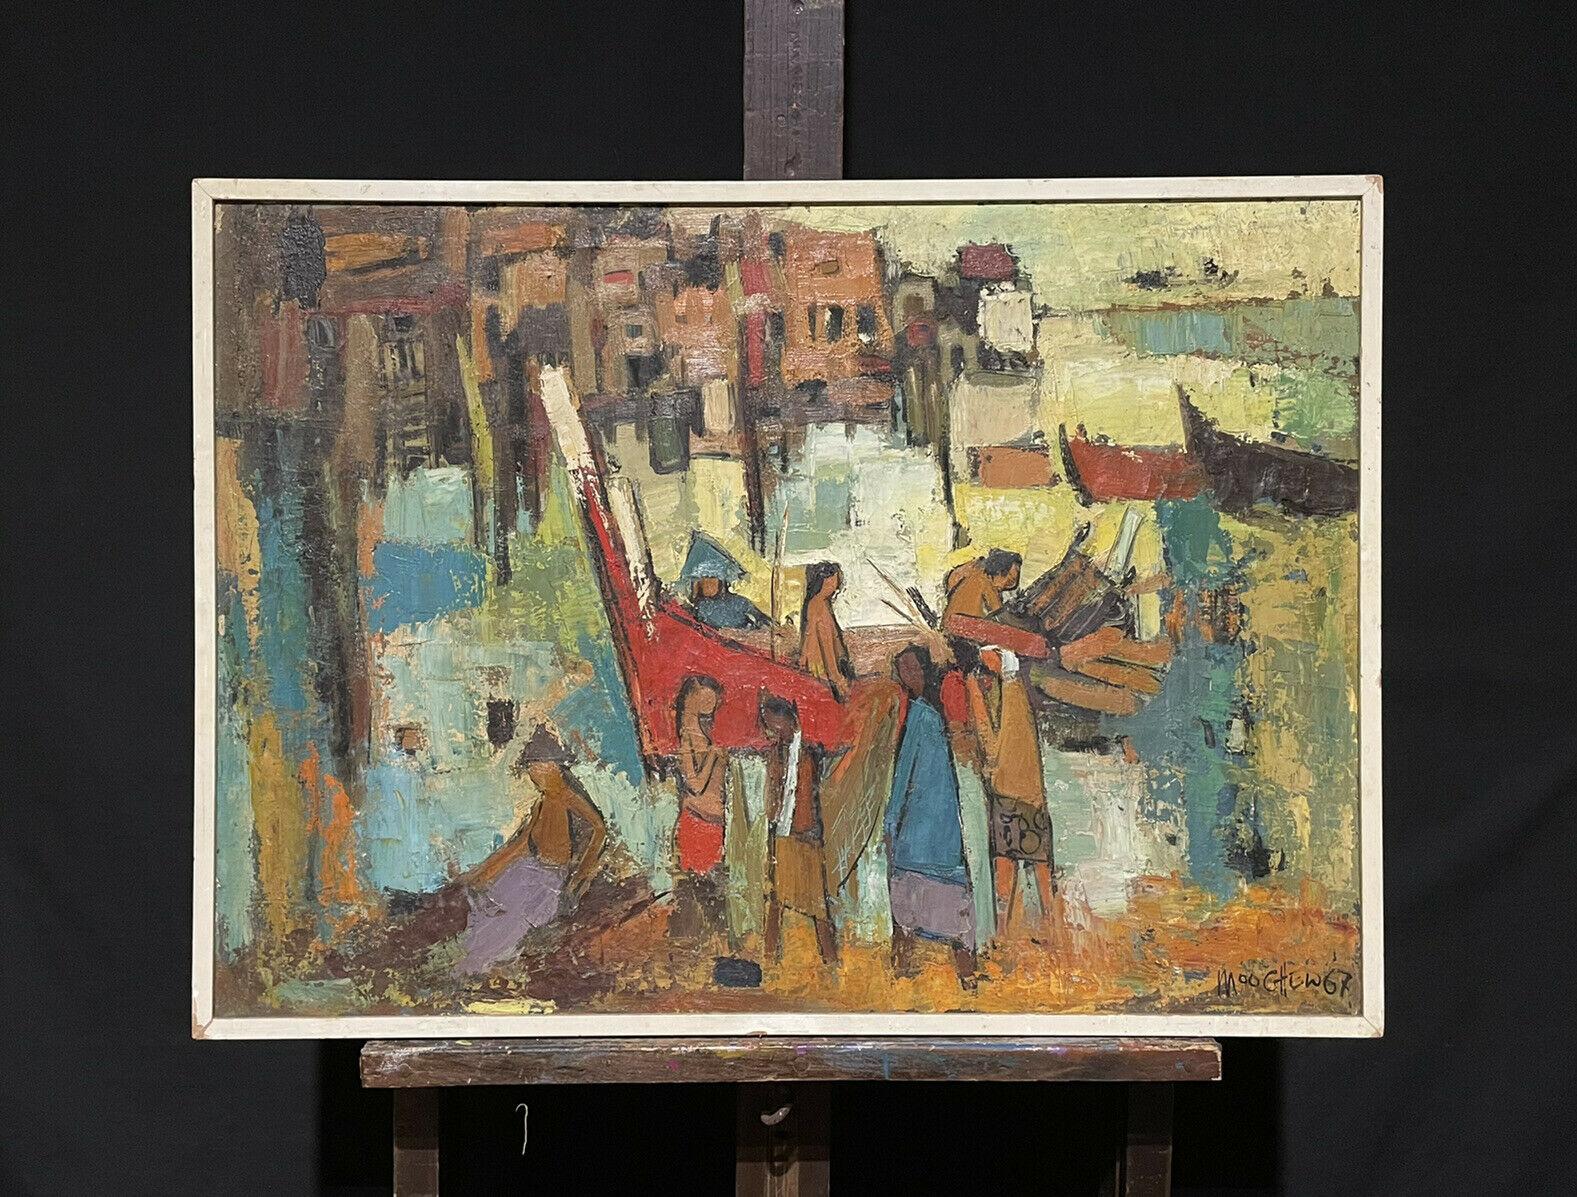 Wong MOO CHEW - PENGHIDUPAN Abstract Painting - 1960's Modernist Signed Oil Very Large Canvas Fisherfolk in Harbour with Boats